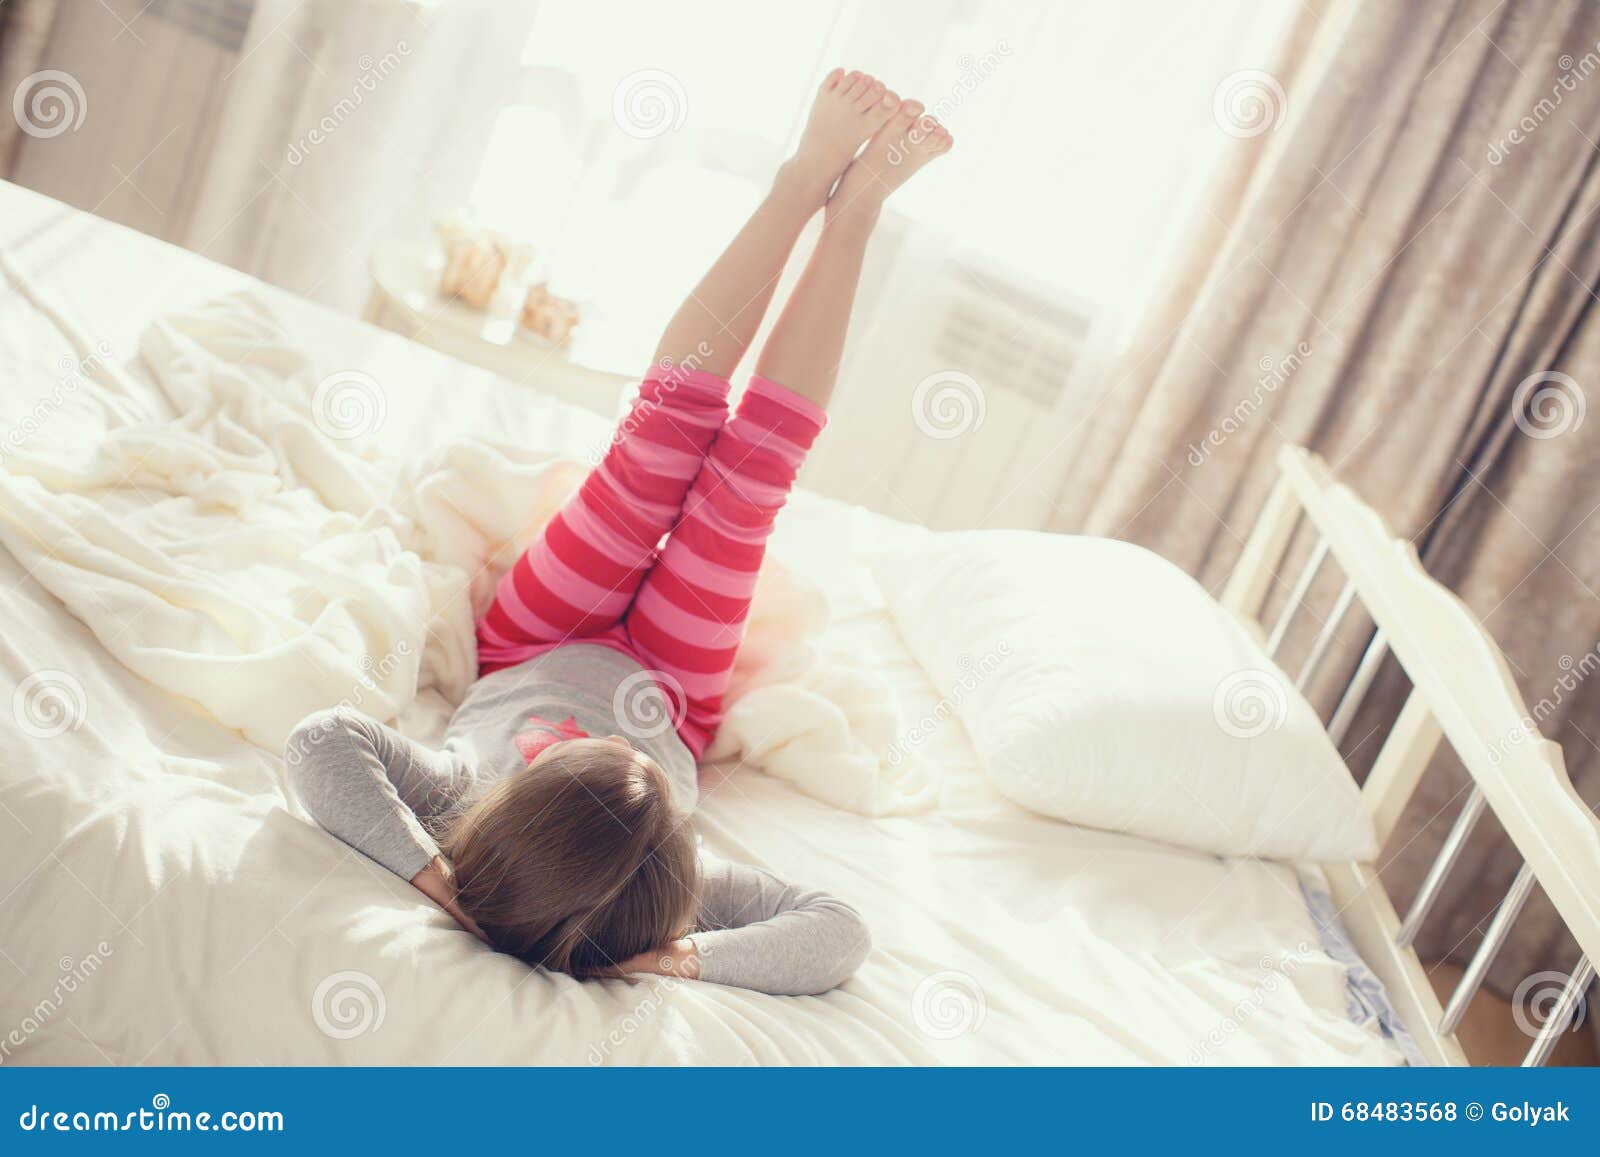 Child Doing Exercises while Lying in Bed Stock Photo - Image of blanket,  caucasian: 68483568